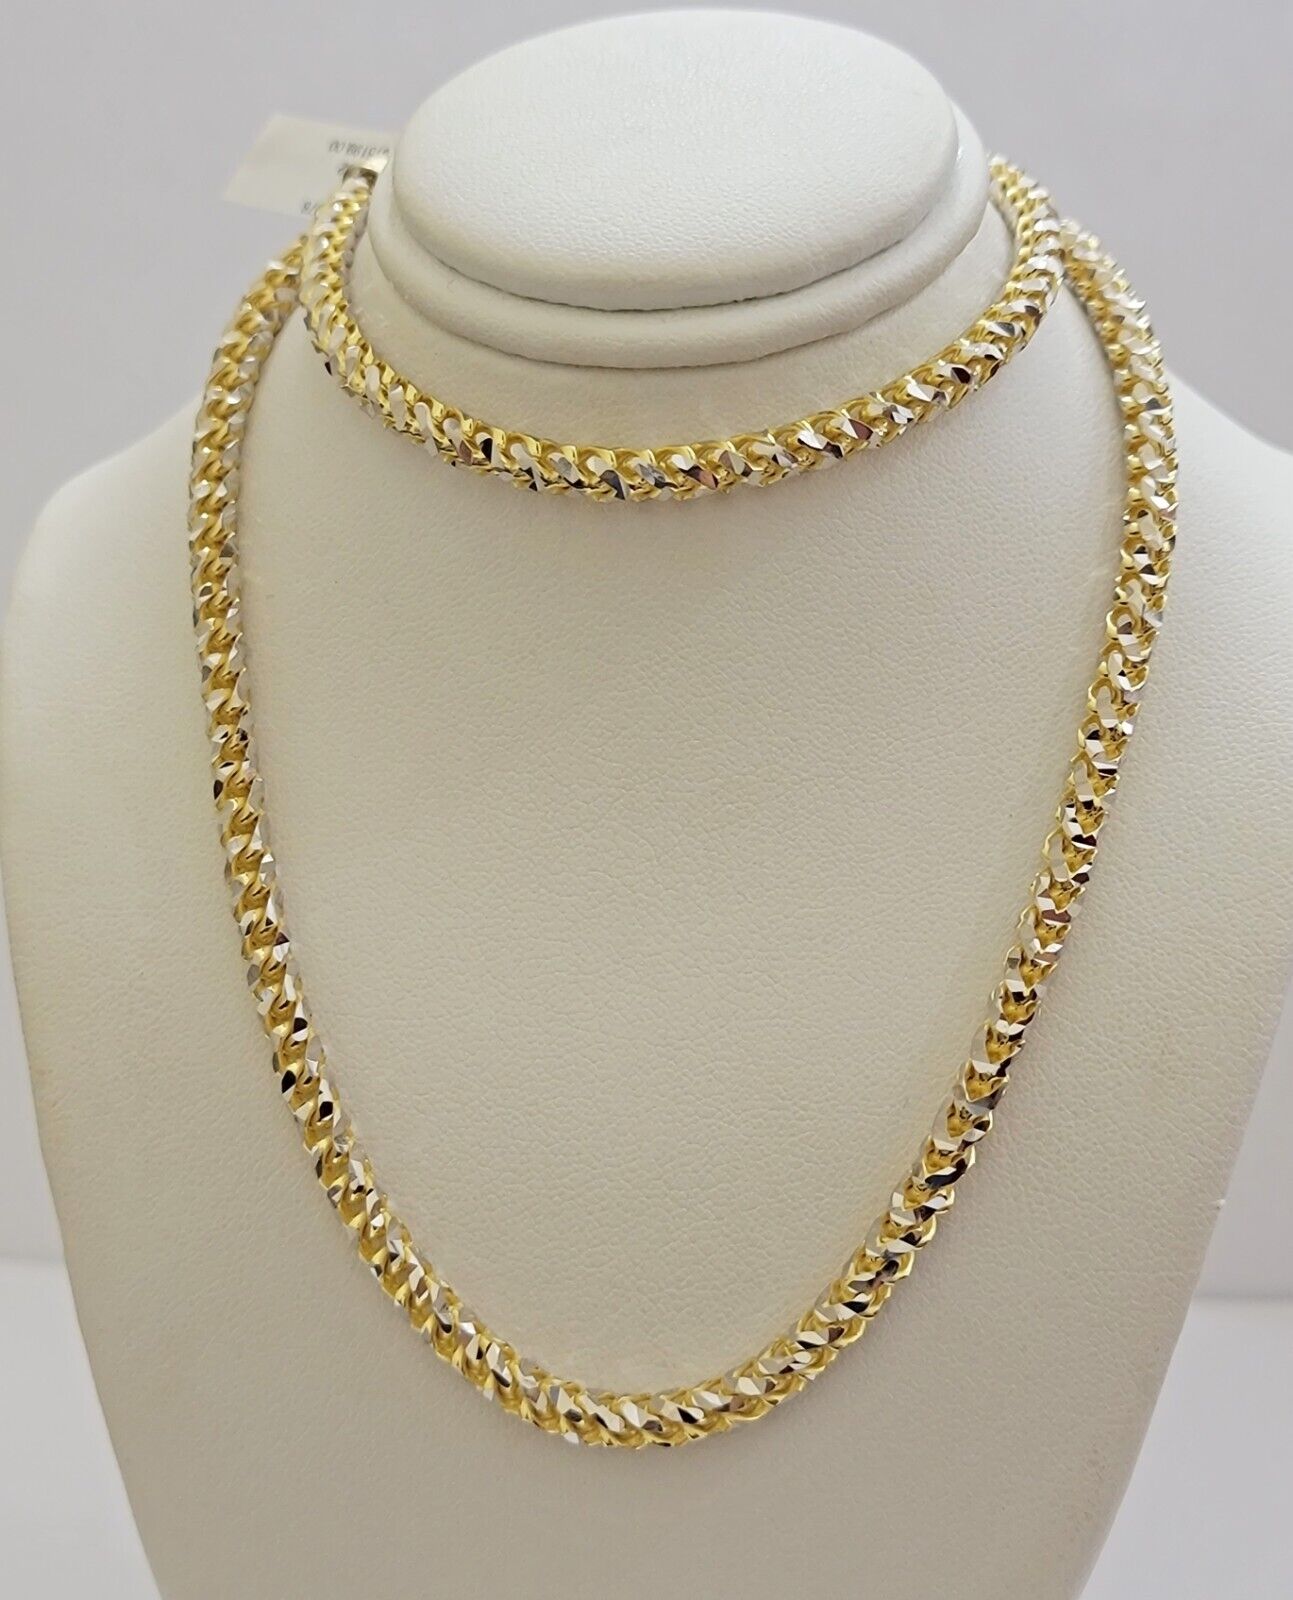 Real 10k Gold Solid Palm Chain Necklace Diamond cut 4.5mm 24